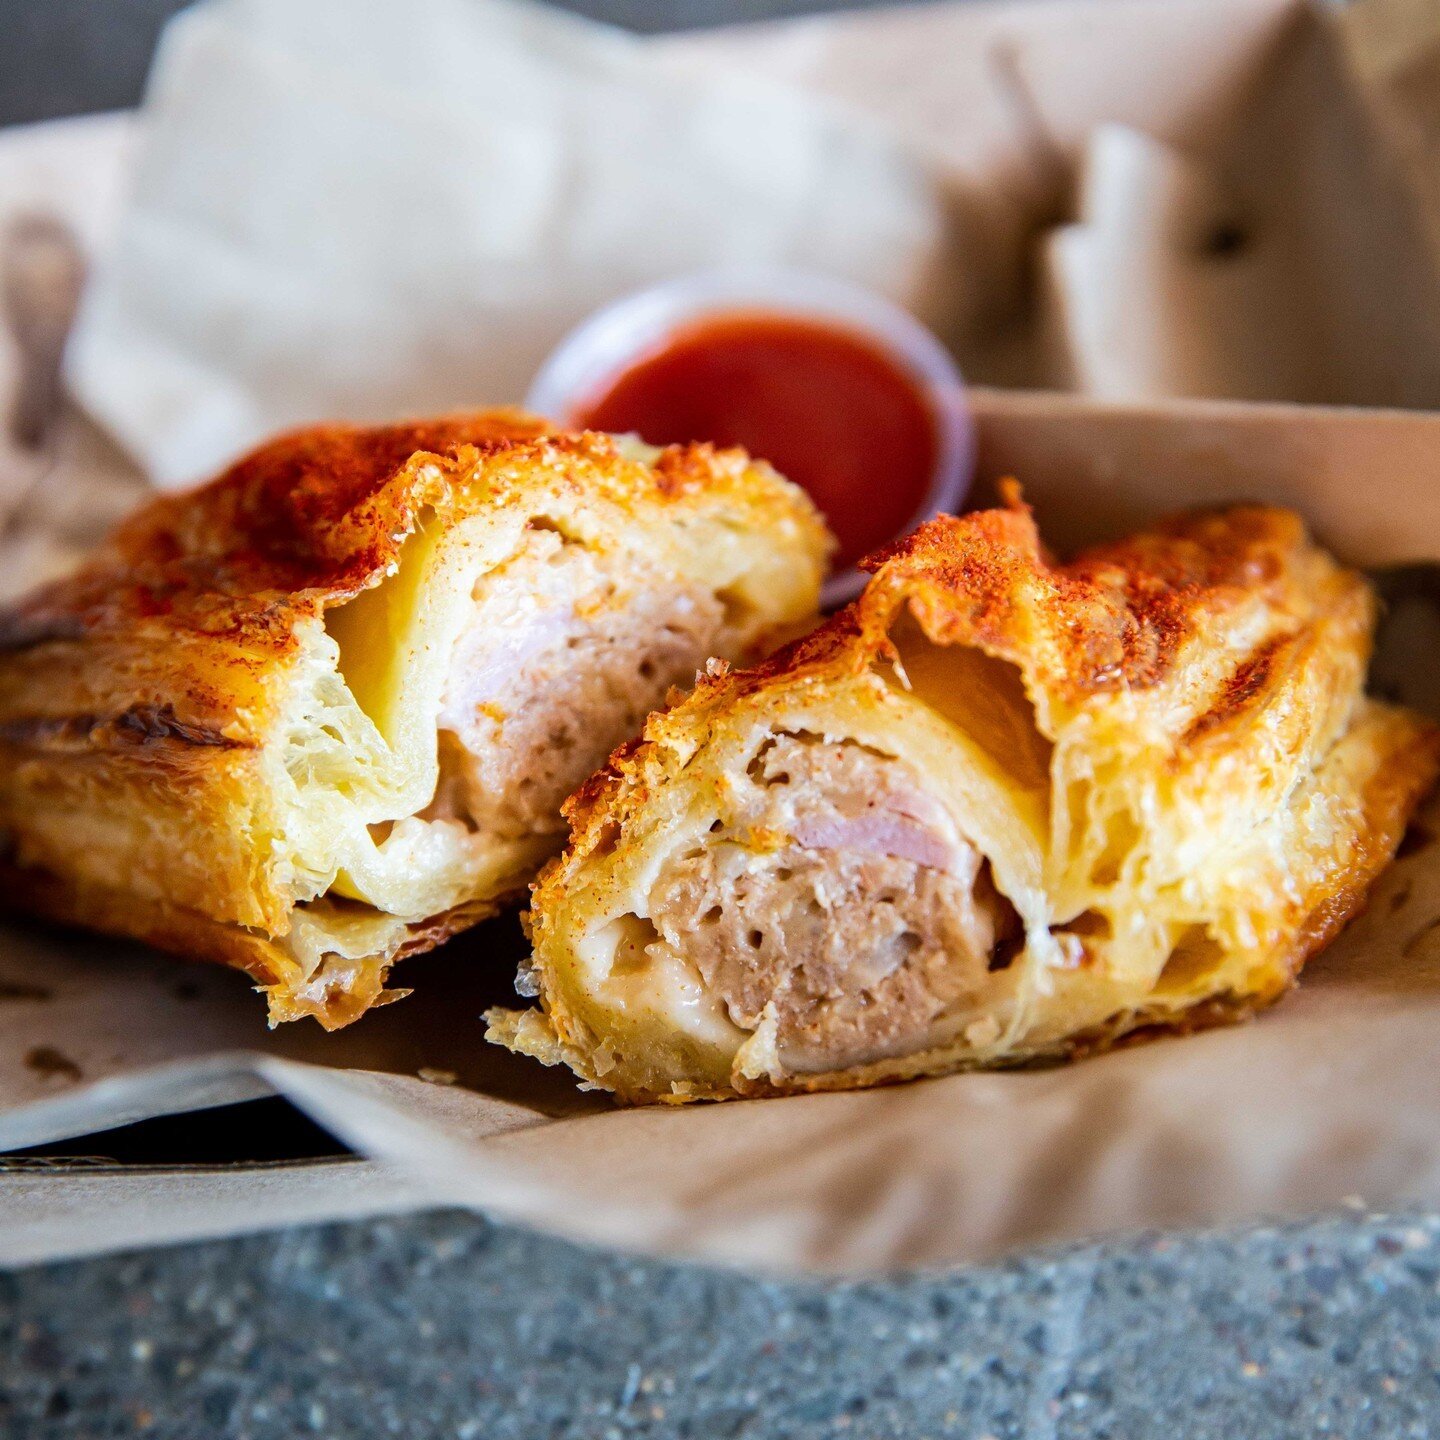 Have you tried our sausage rolls? #haydenspiesulladulla #Haydenspiessausagerolls #ulladulla #southcoastnsw